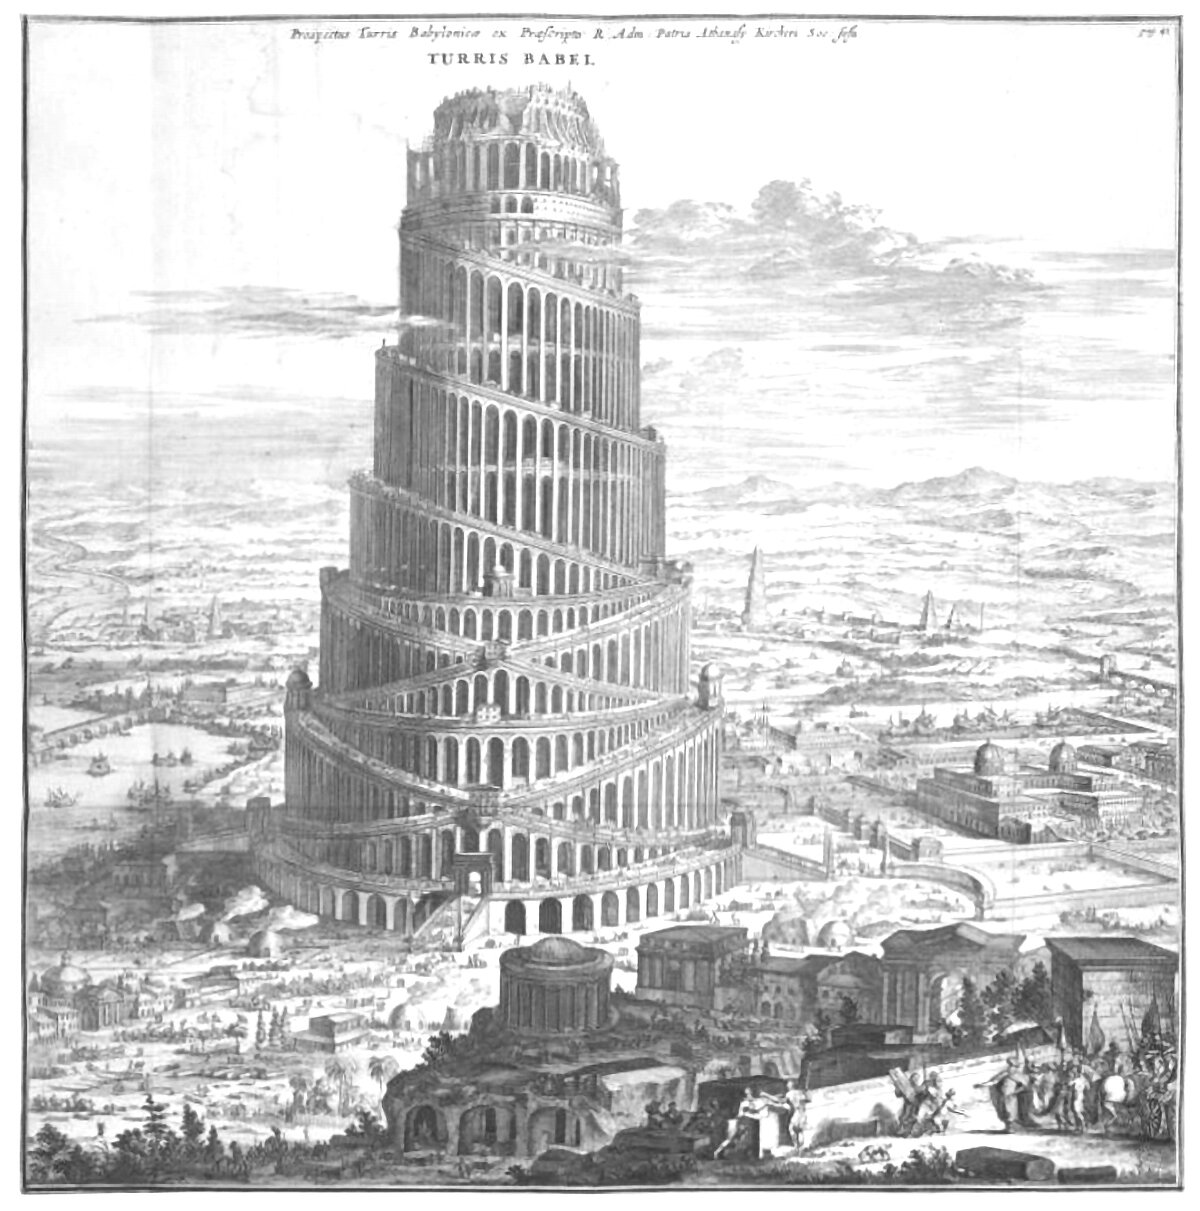 A 1679 illustration of the Tower of Babel, from Athanasius Kircher’s book Turris Babel. The tower is shown with Roman arches throughout, and a double-spiral ramp that runs between flat terraces.